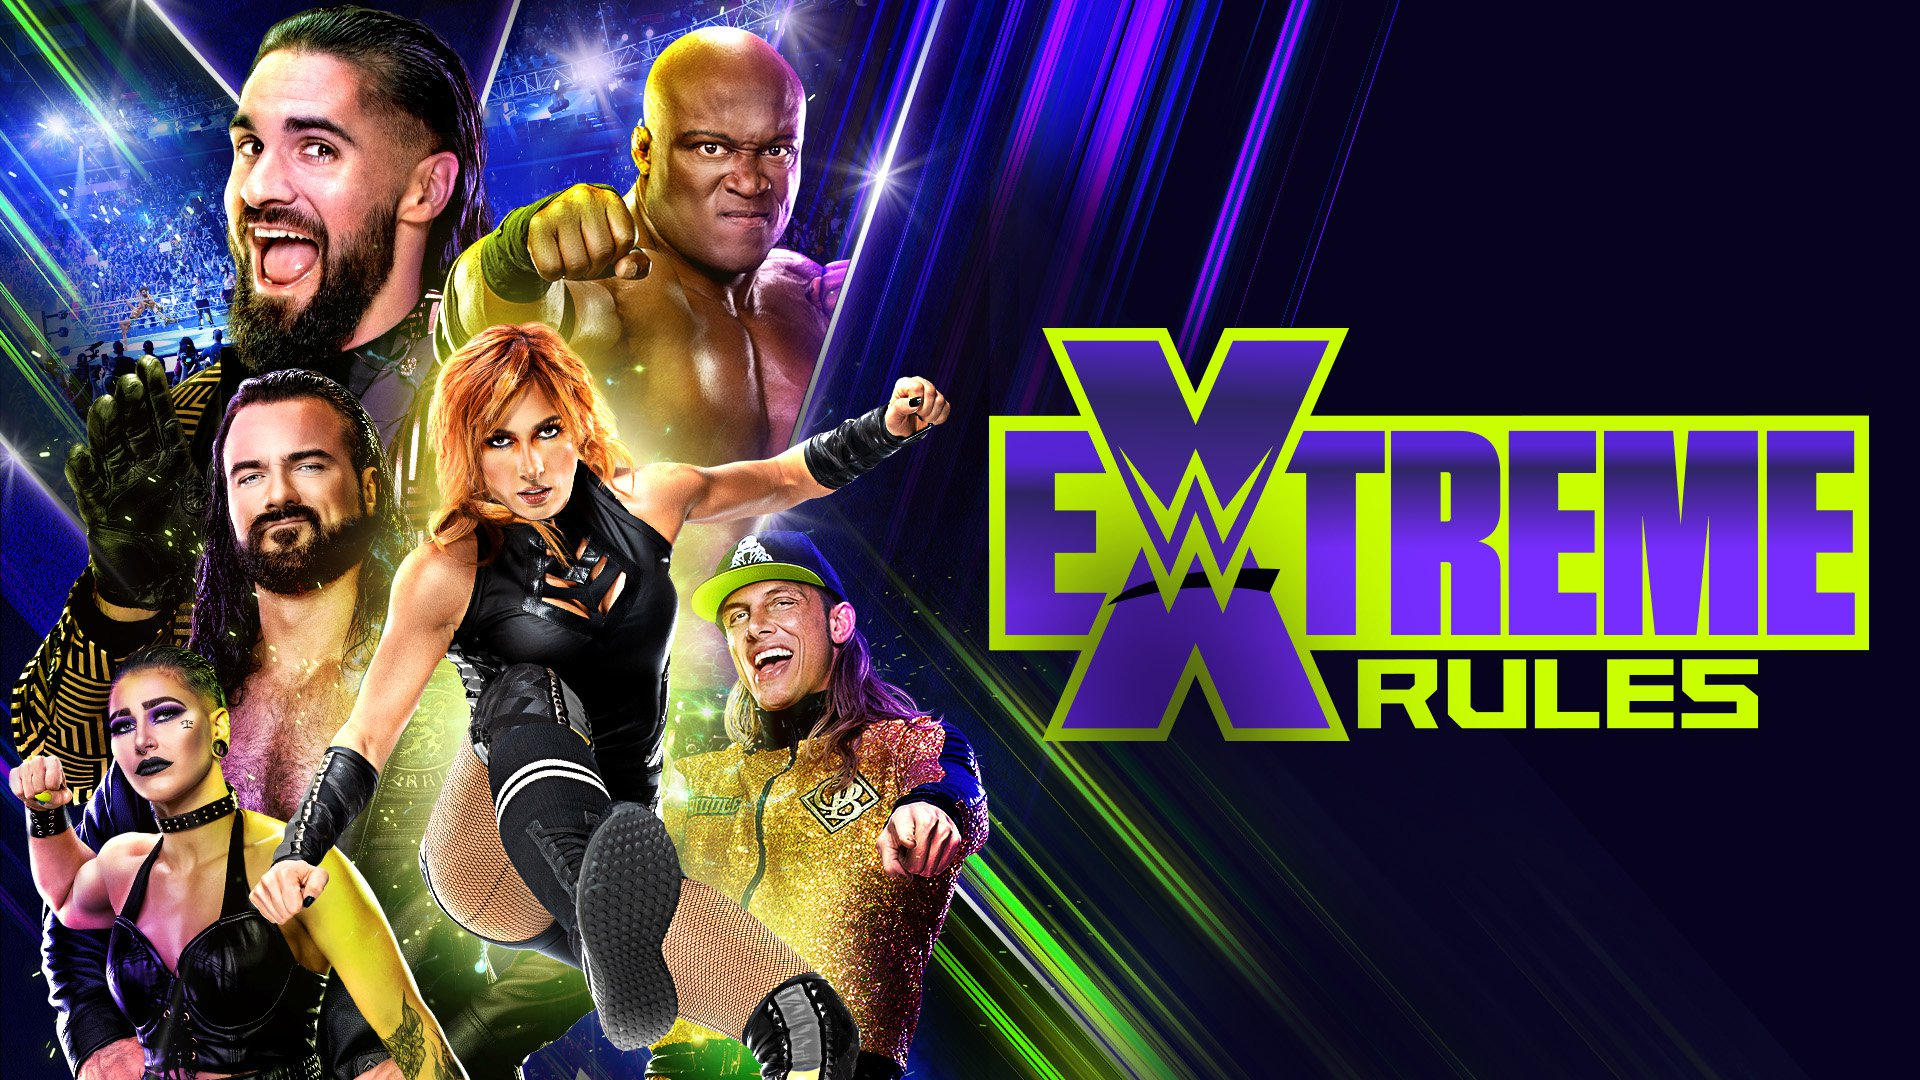 Title Ladder Match Set for WWE Extreme Rules, Updated Map